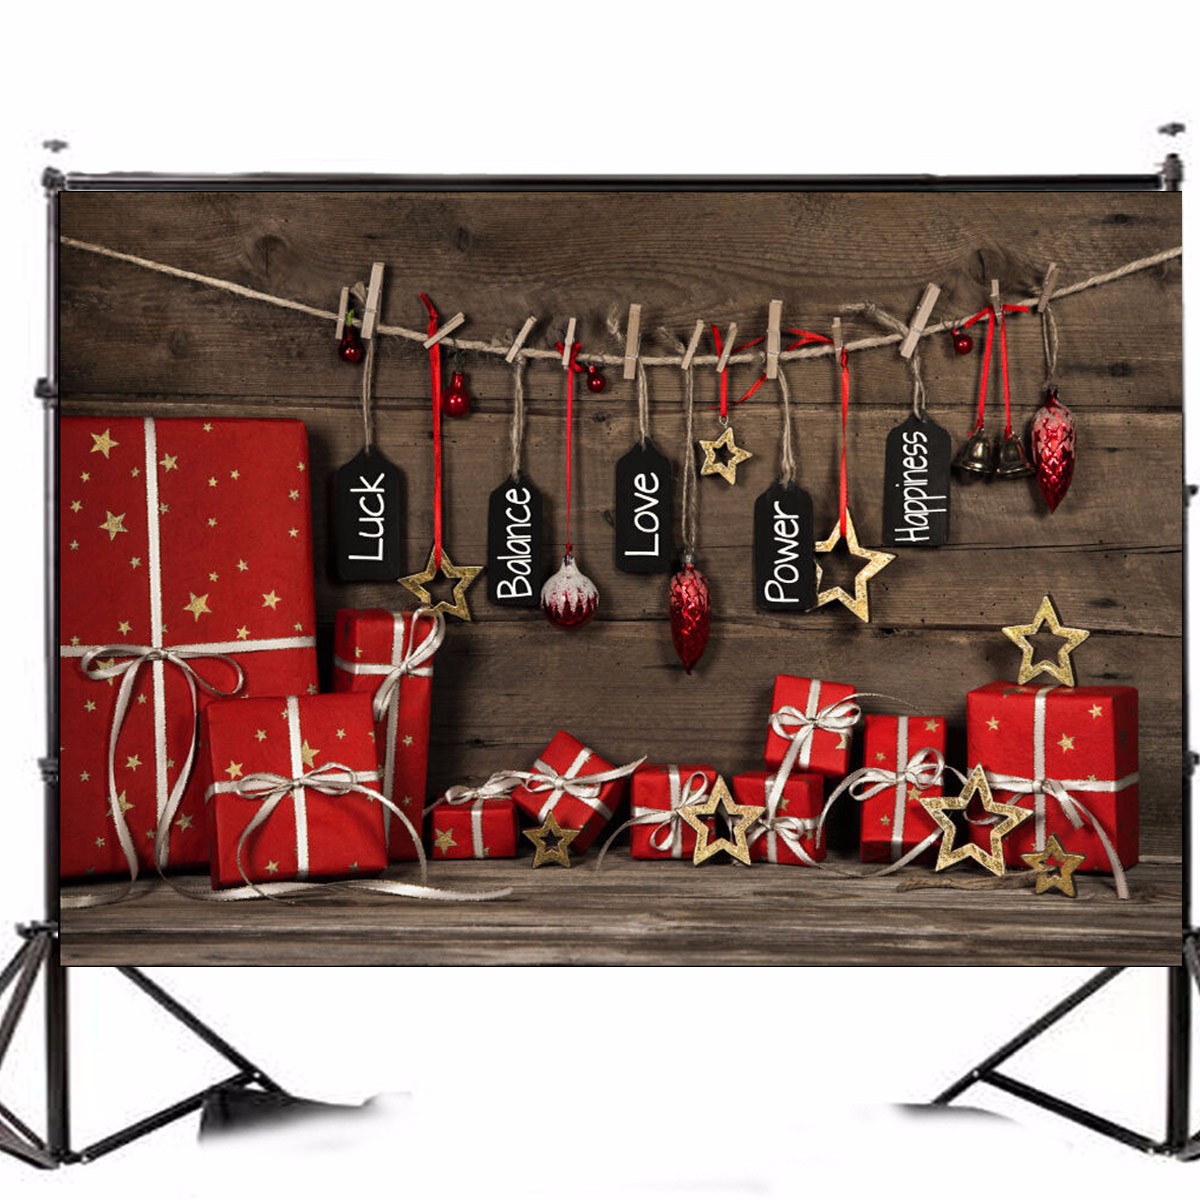 90x150cm3x5ft-Wooden-Gift-Box-Christmas-Background-Vinyl-Fabric-Photography-1130349-1